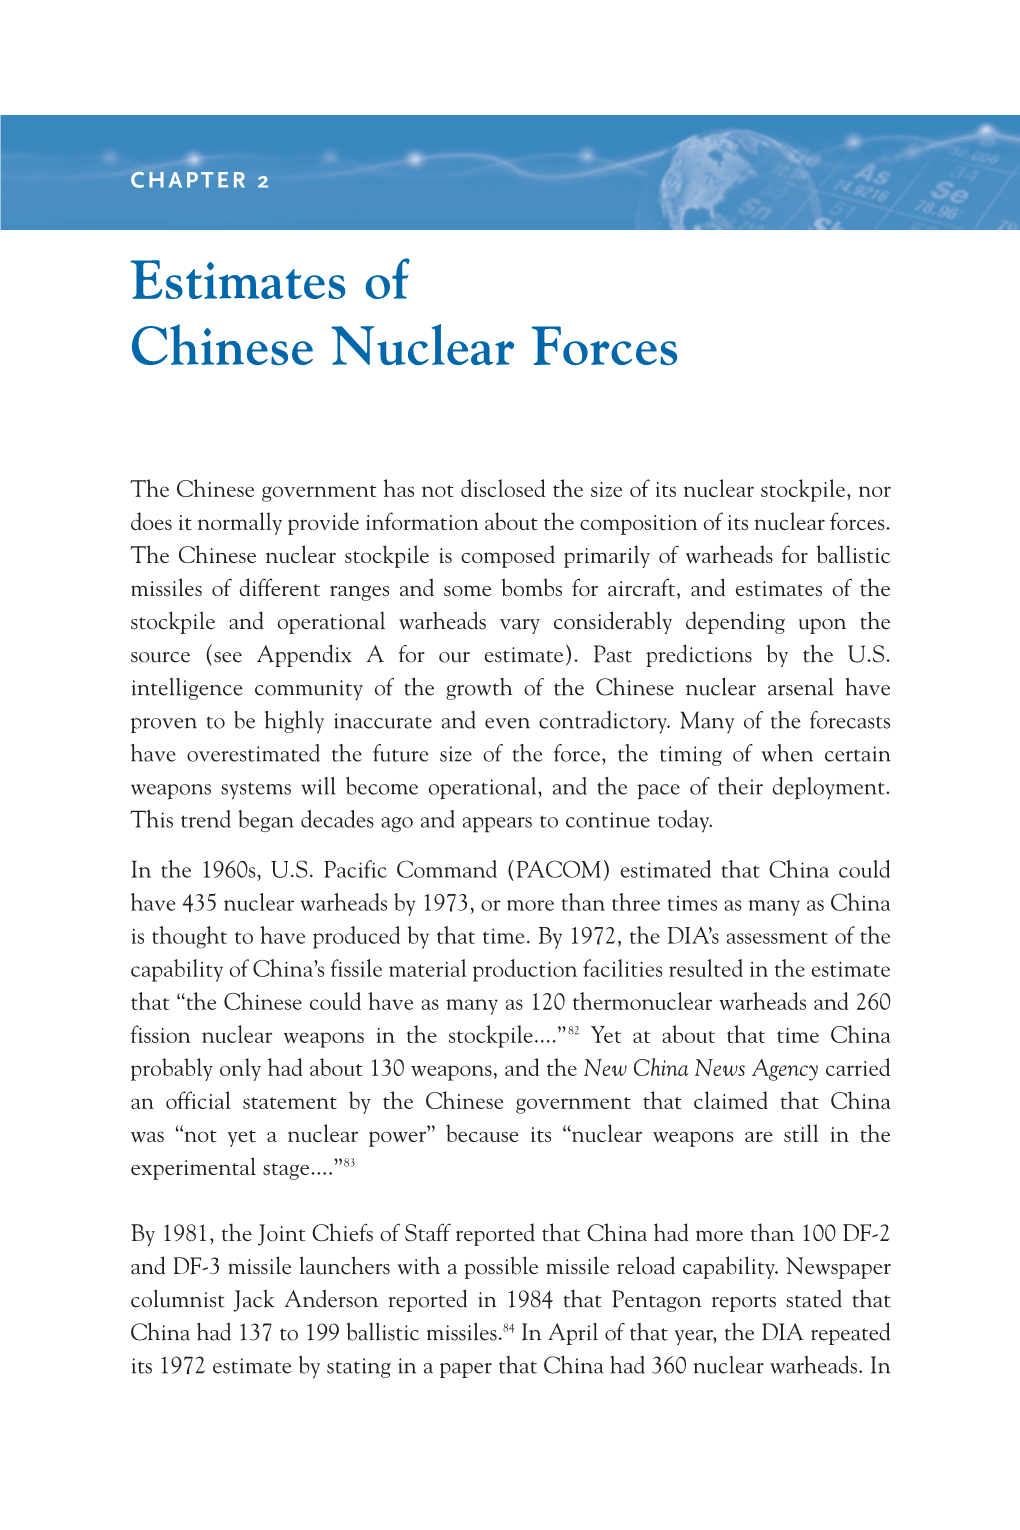 Estimates of Chinese Nuclear Forces